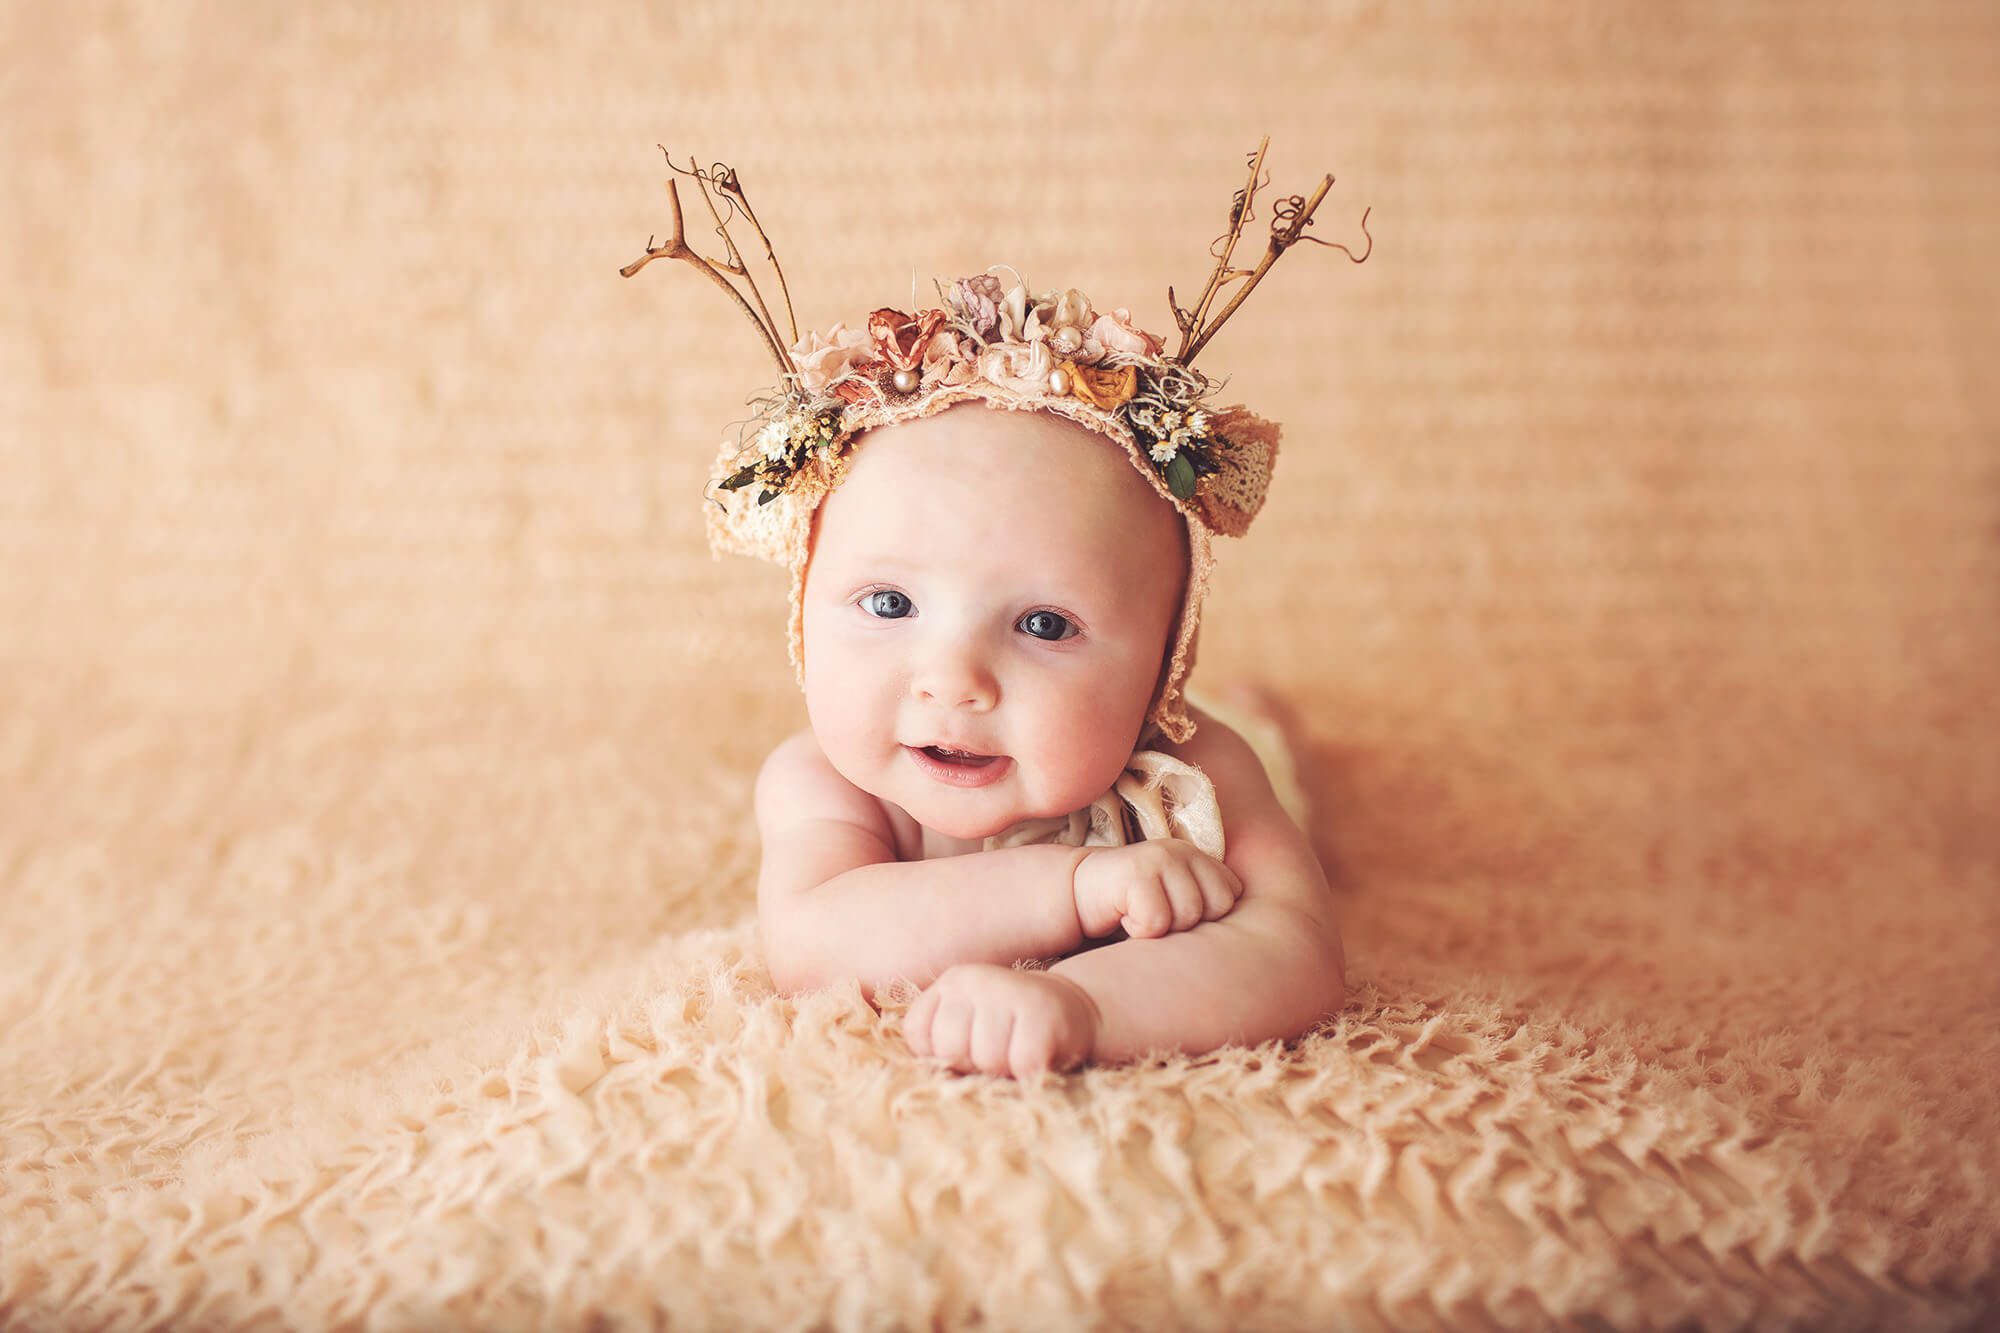 Three-month old baby girl in a peach, floral deer bonnet during her milestone session